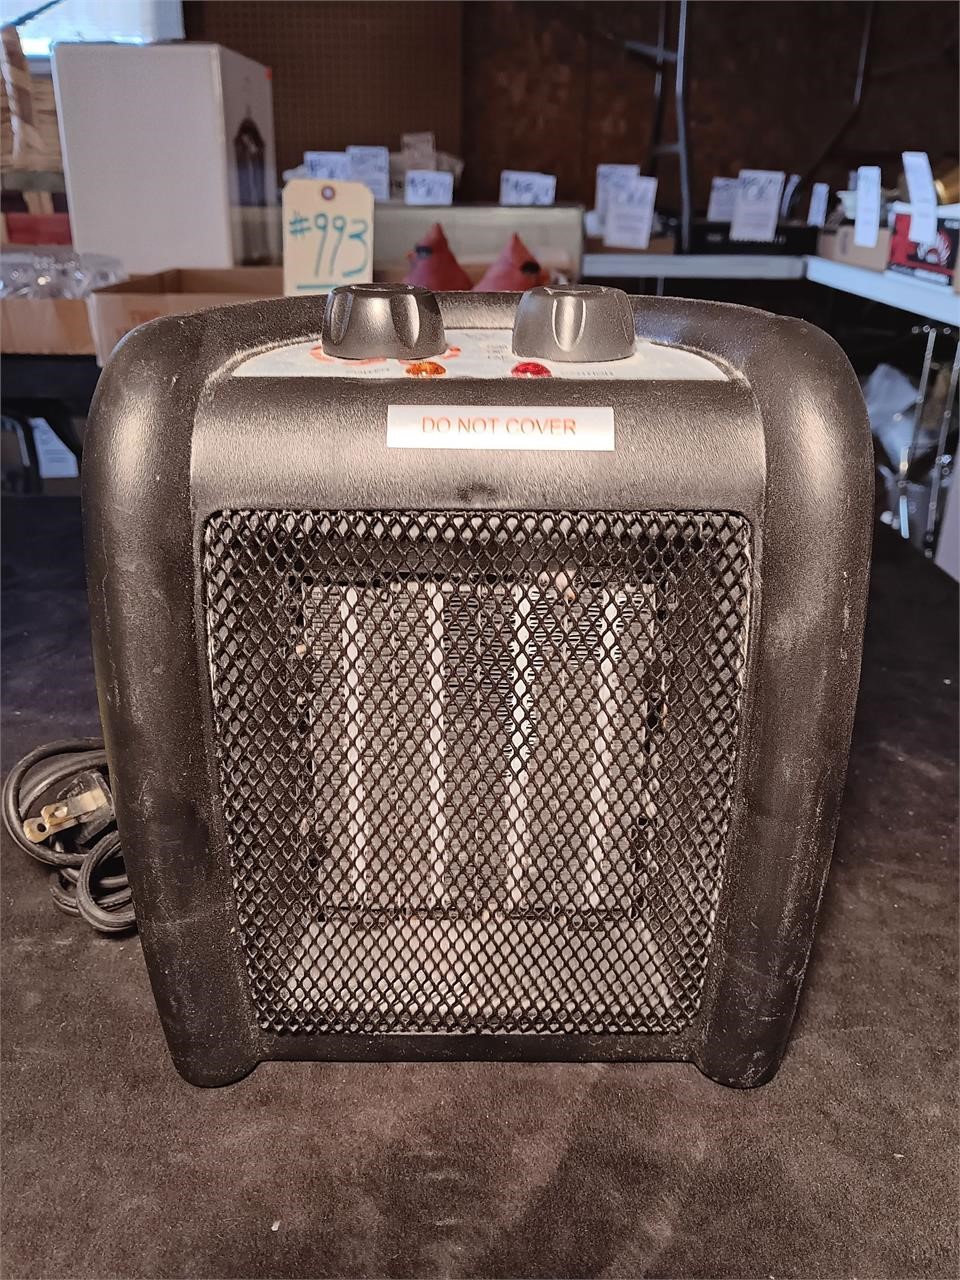 2 Electric Small Heaters. Honeywell.